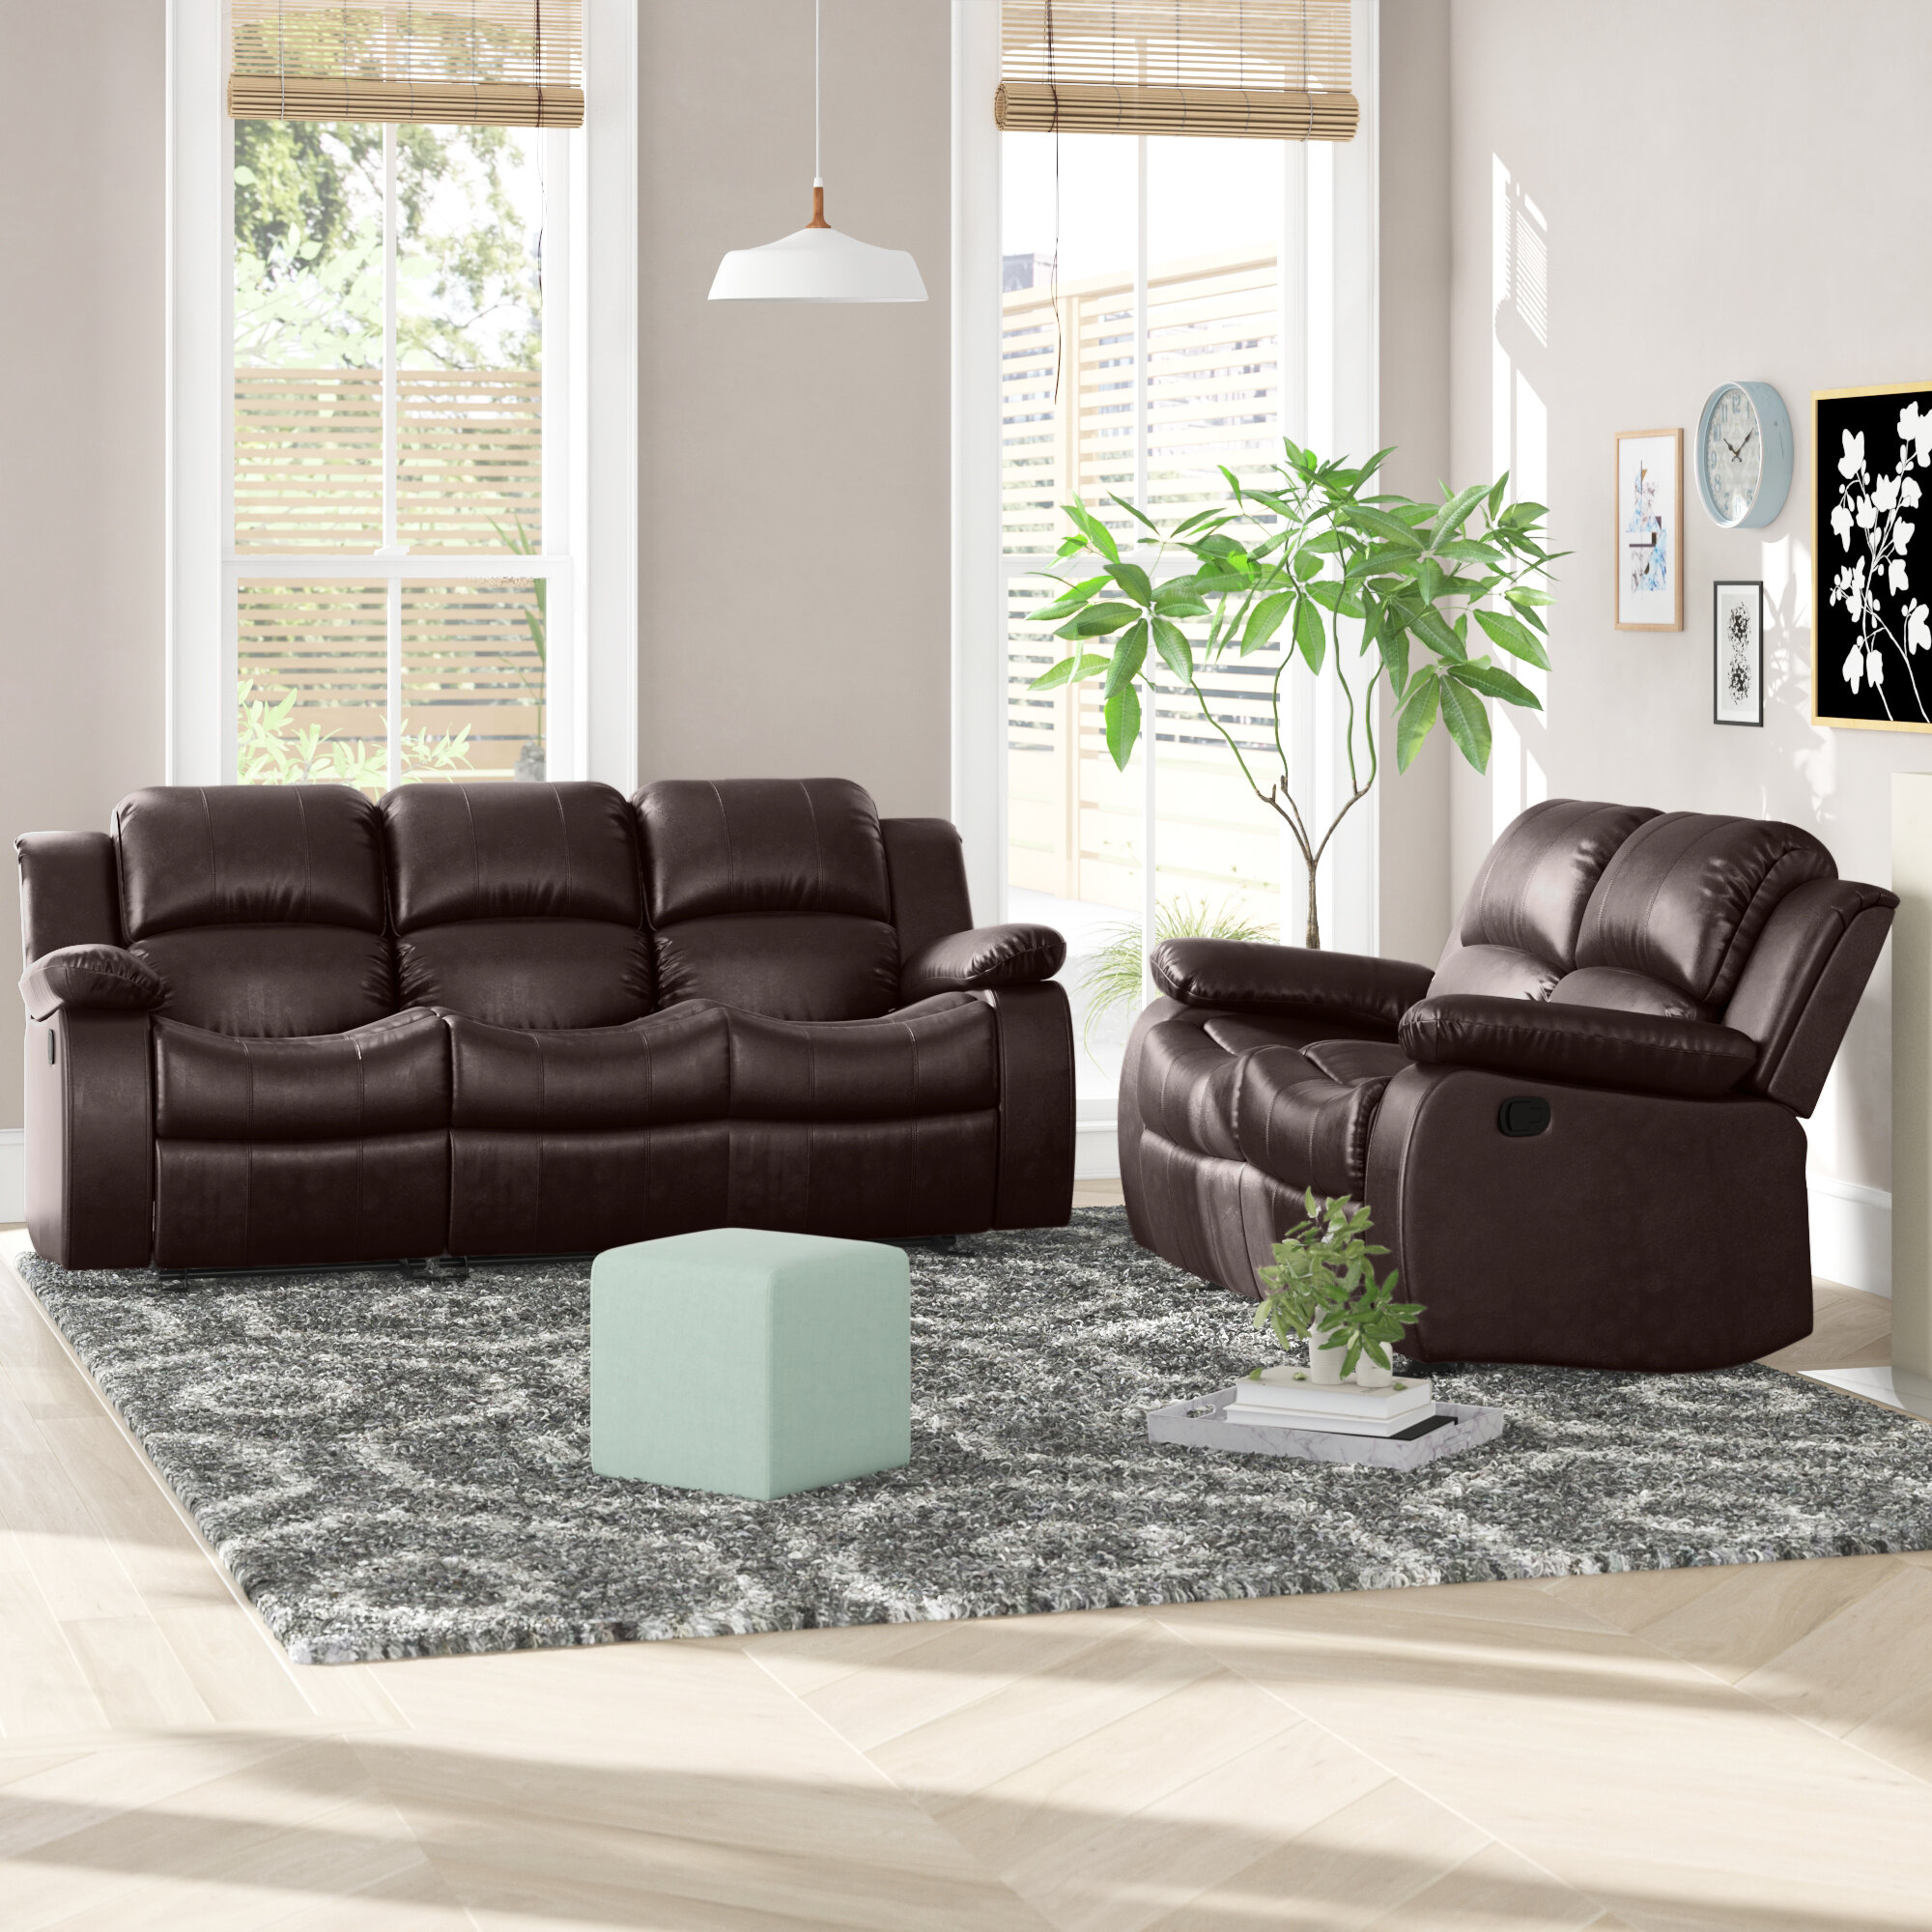 Bryce 2 Piece Faux Leather Reclining Living Room Set